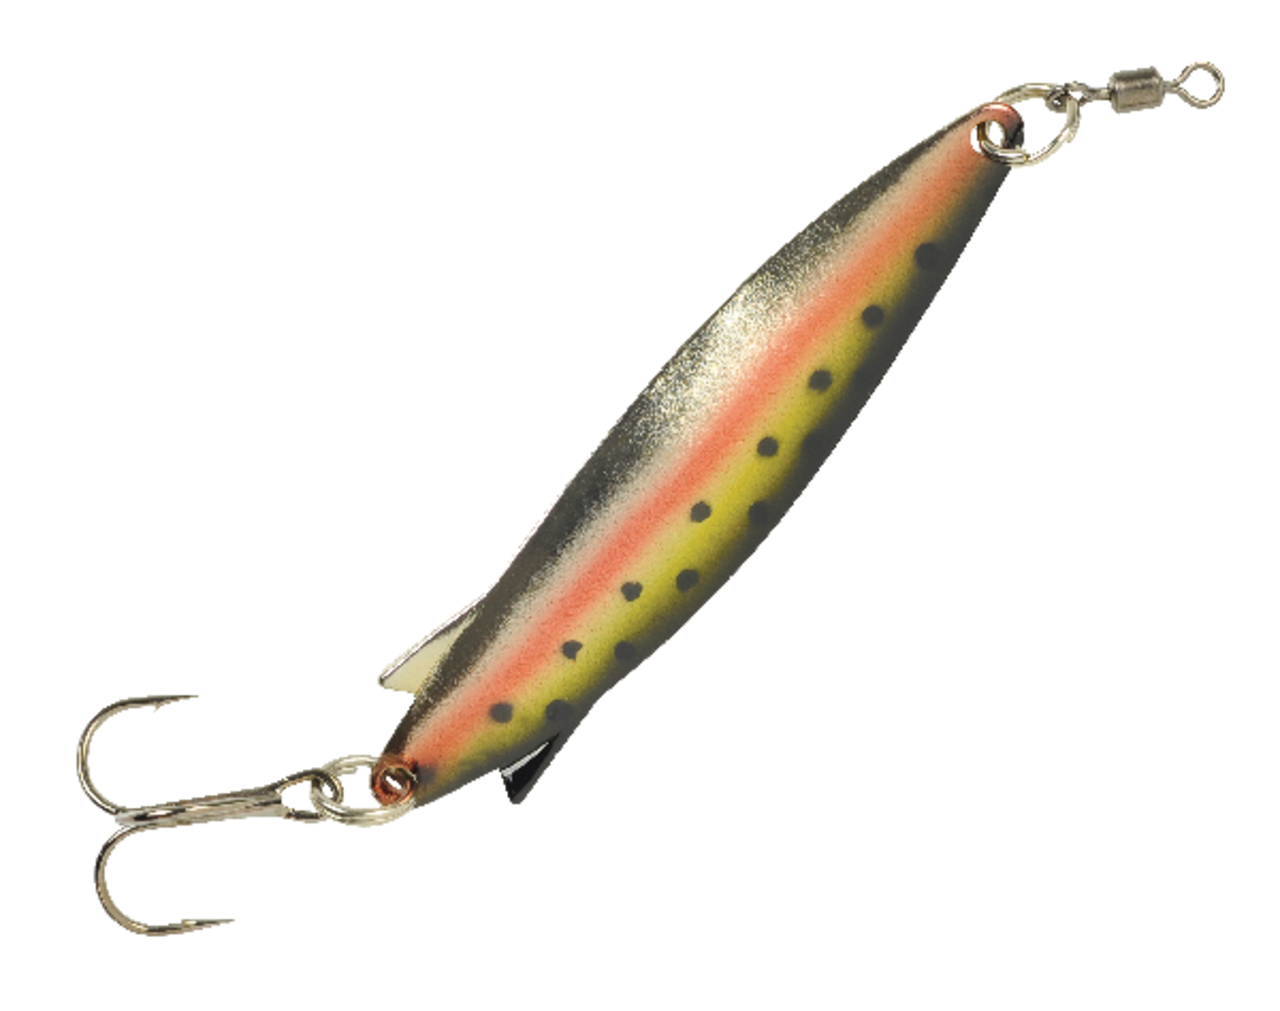 https://media-www.canadiantire.ca/product/playing/fishing/fishing-lures/0775530/johnson-slimfish-chrome-1-2oz-d34afcfa-f73a-42cc-8e85-f6deec25387f.png?imdensity=1&imwidth=640&impolicy=mZoom